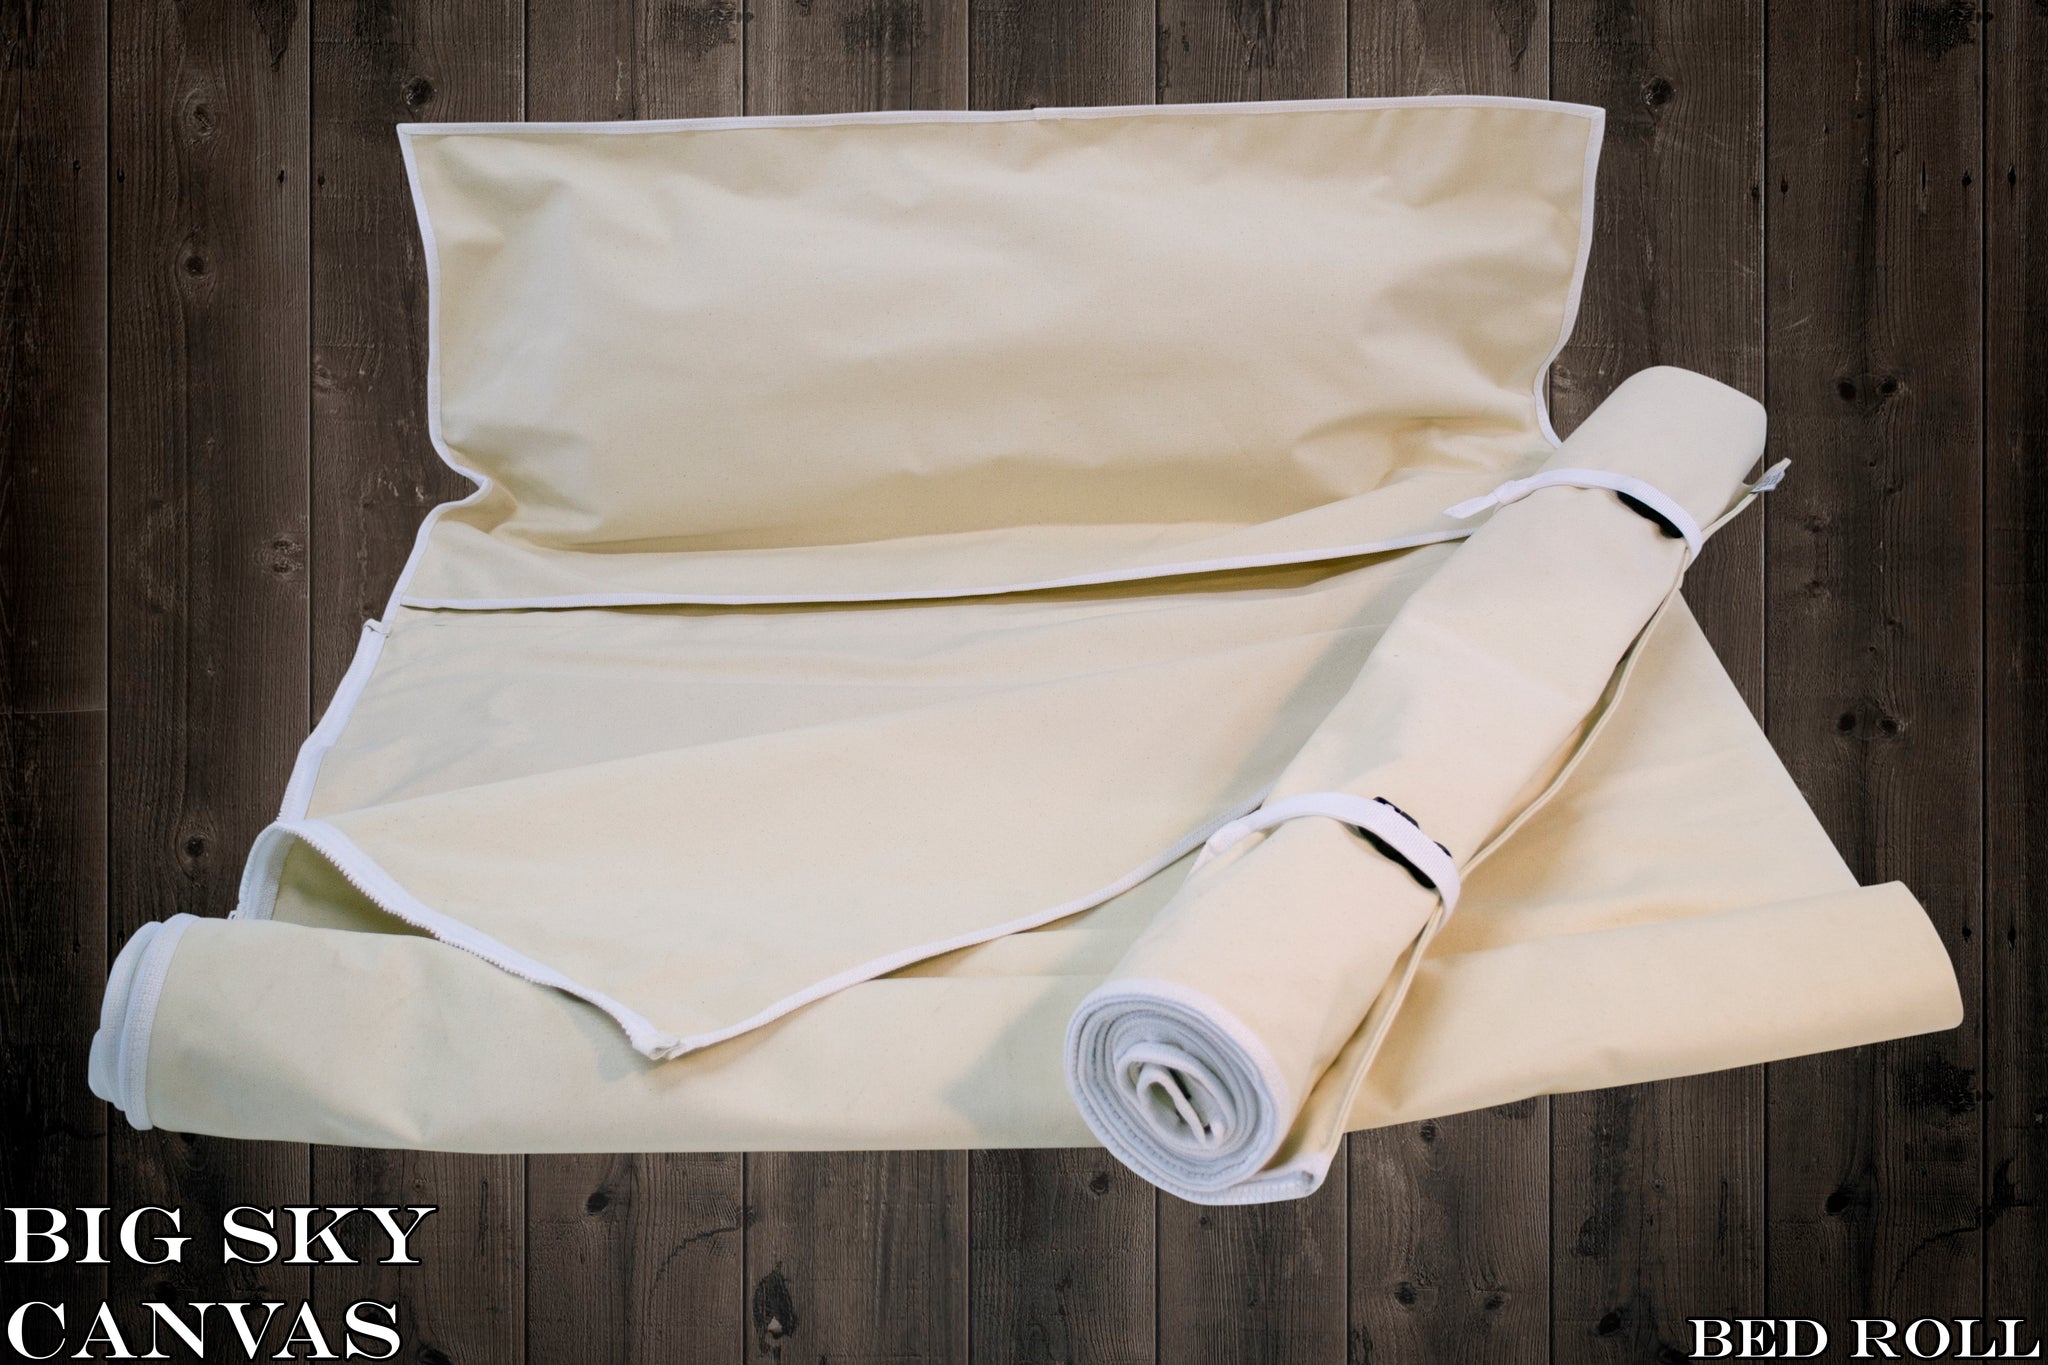 What is a Bedroll?